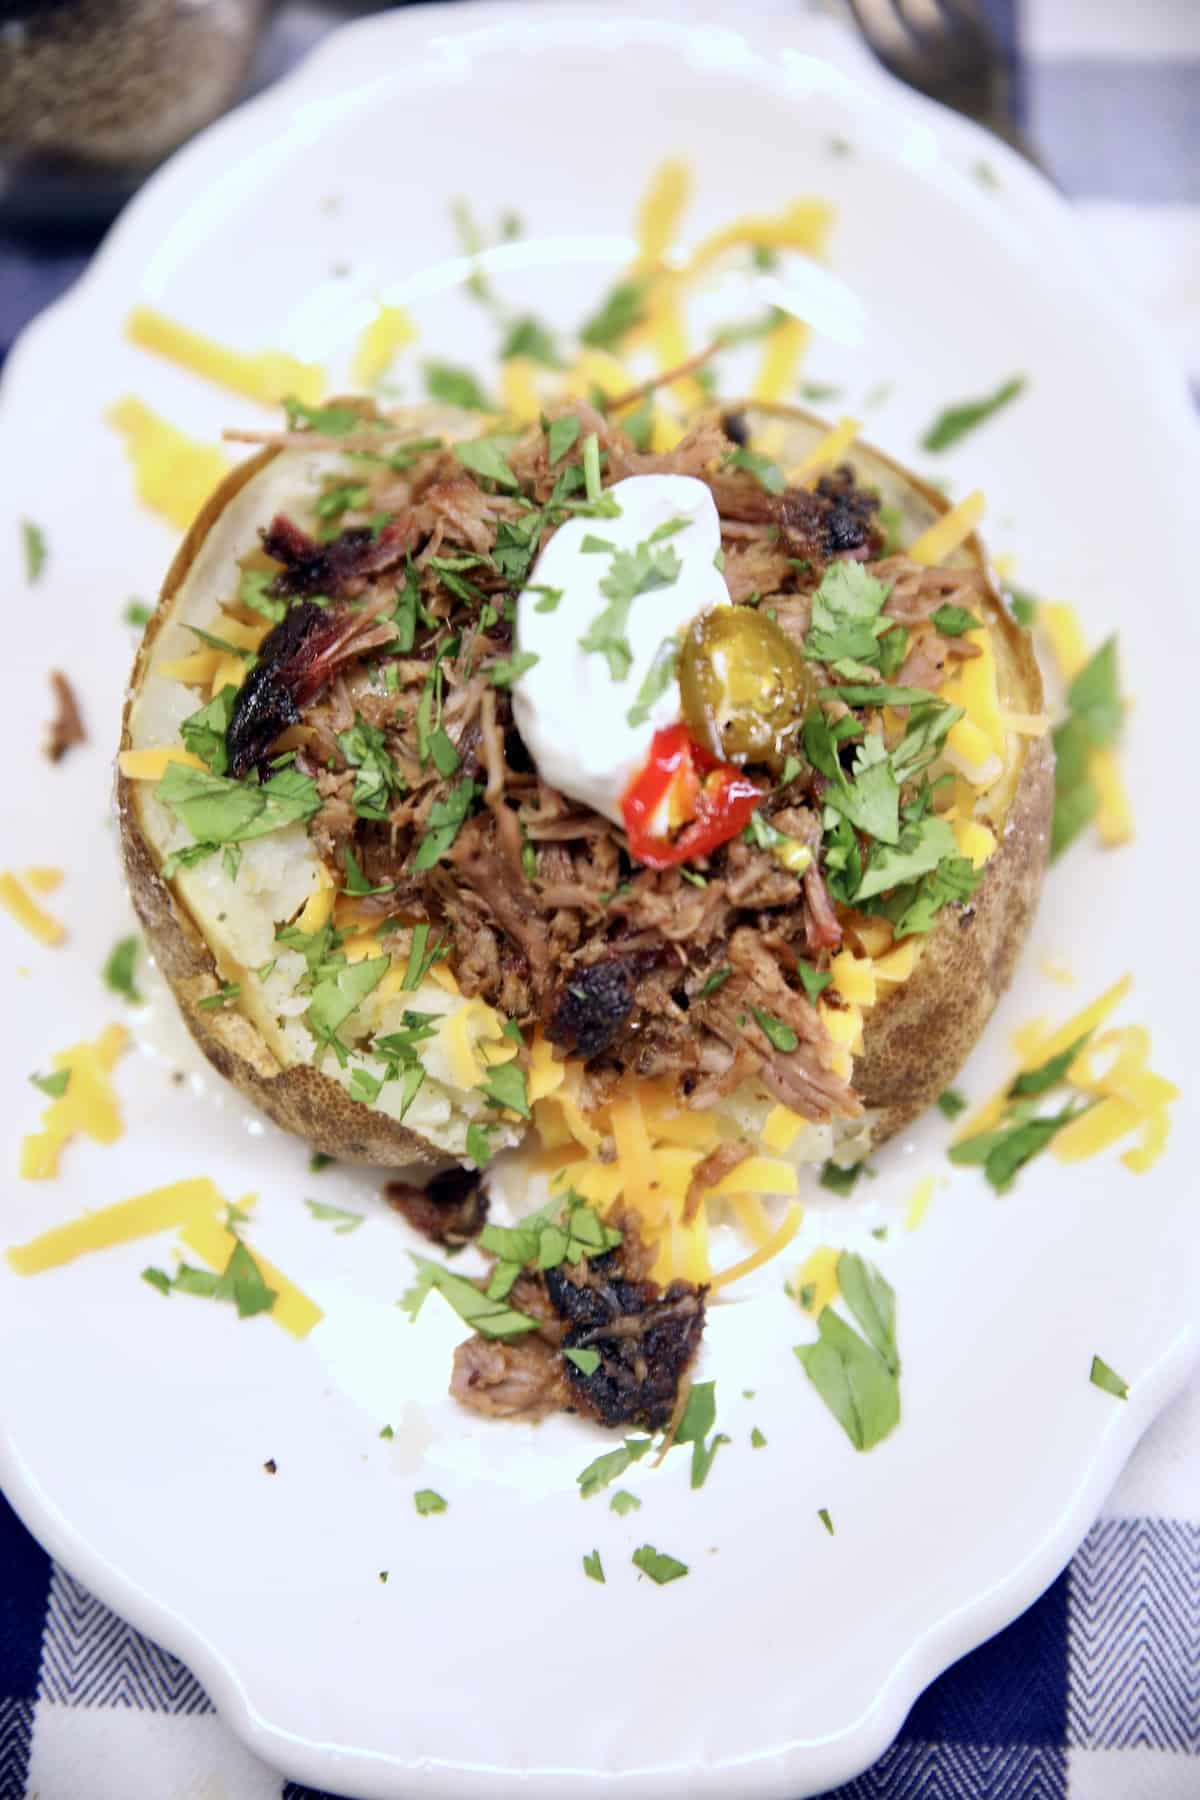 Baked potato topped with cheese, brisket, sour cream.